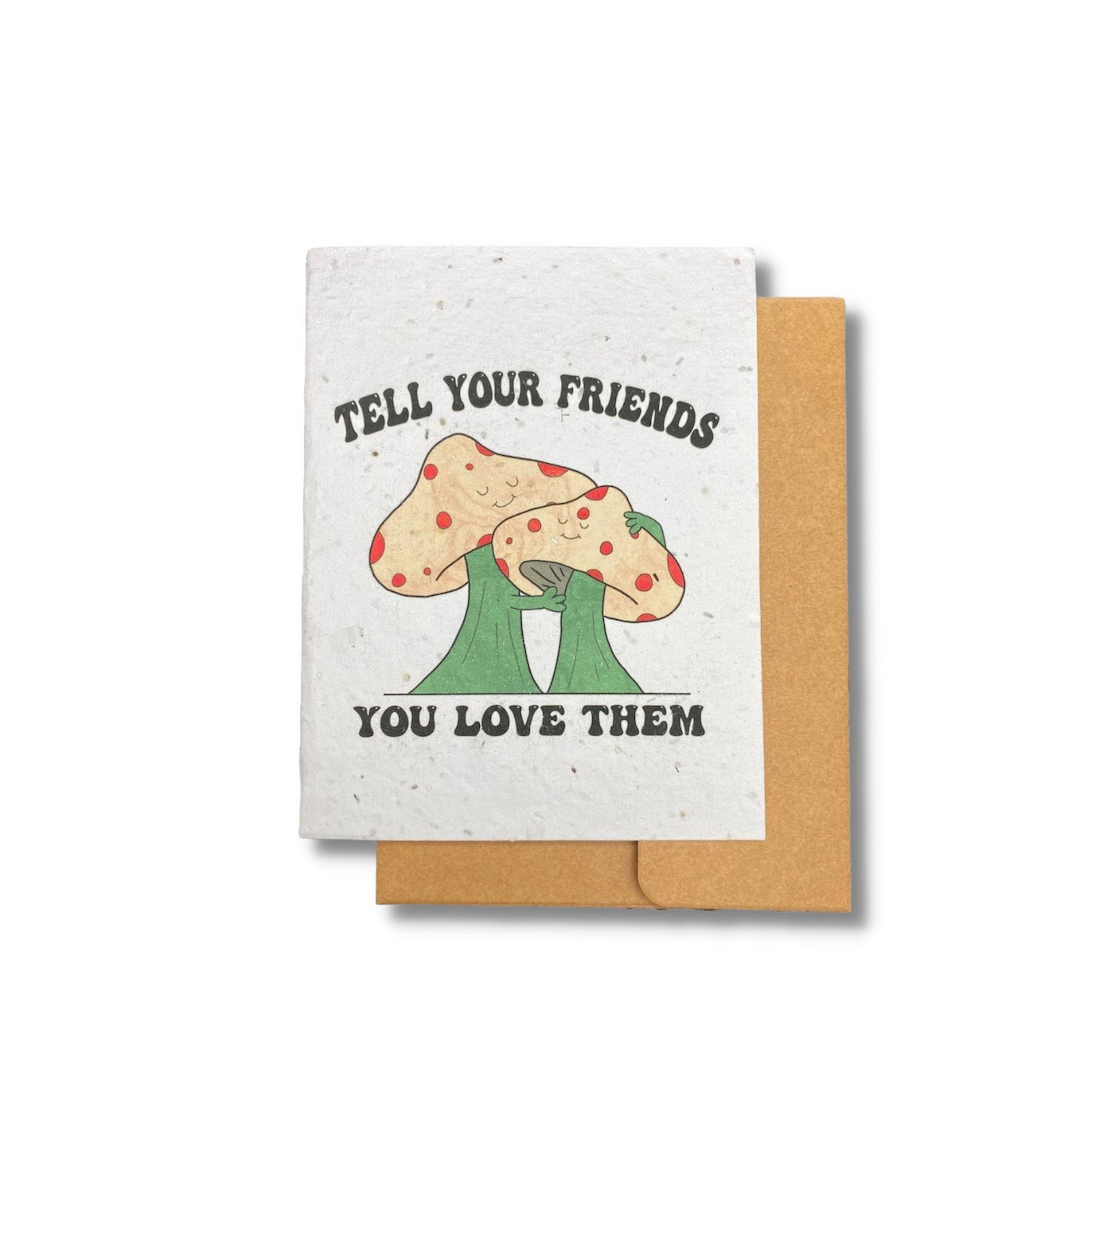 Tell Your Friends Plantable Seed Greeting Card by HOA Collective